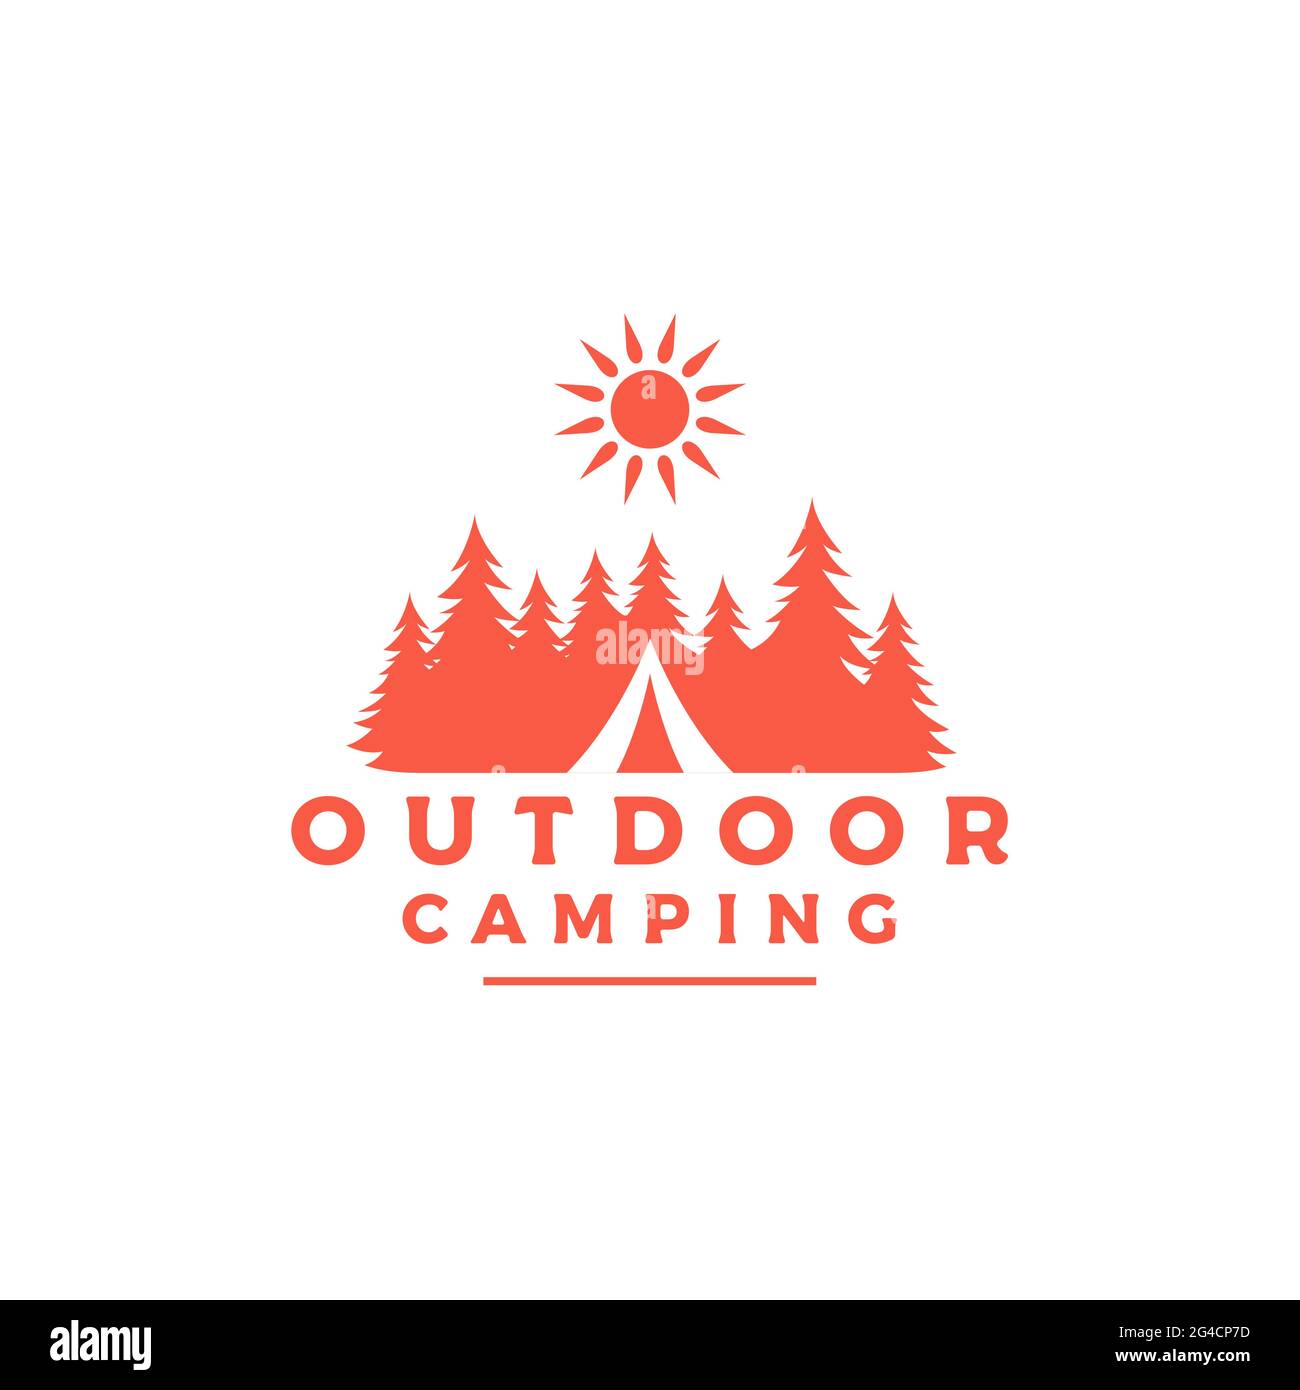 Vintage retro Forest camping logo emblem summer camping vector illustration with tent and pine trees Stock Vector